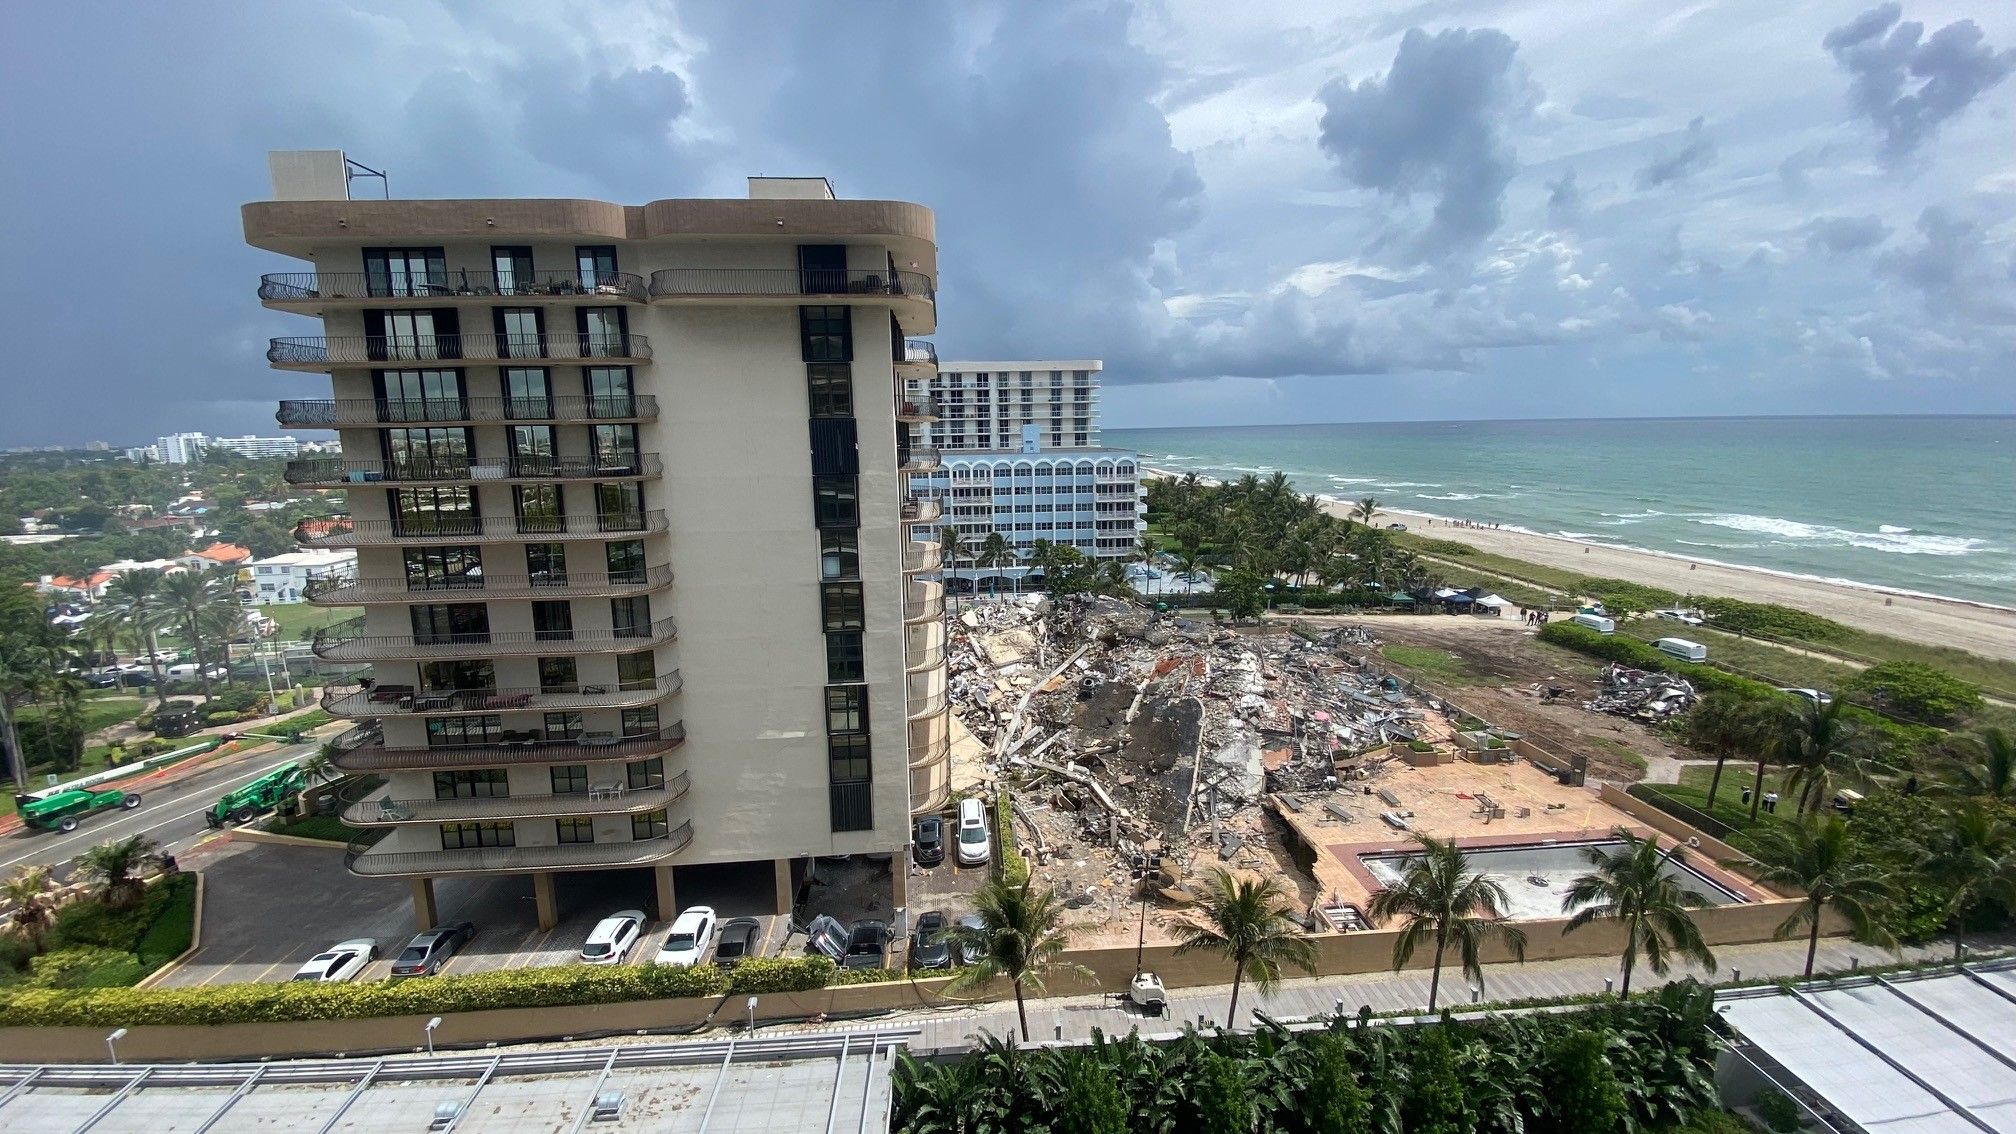 Search operations at the site end a month after the Florida building collapse